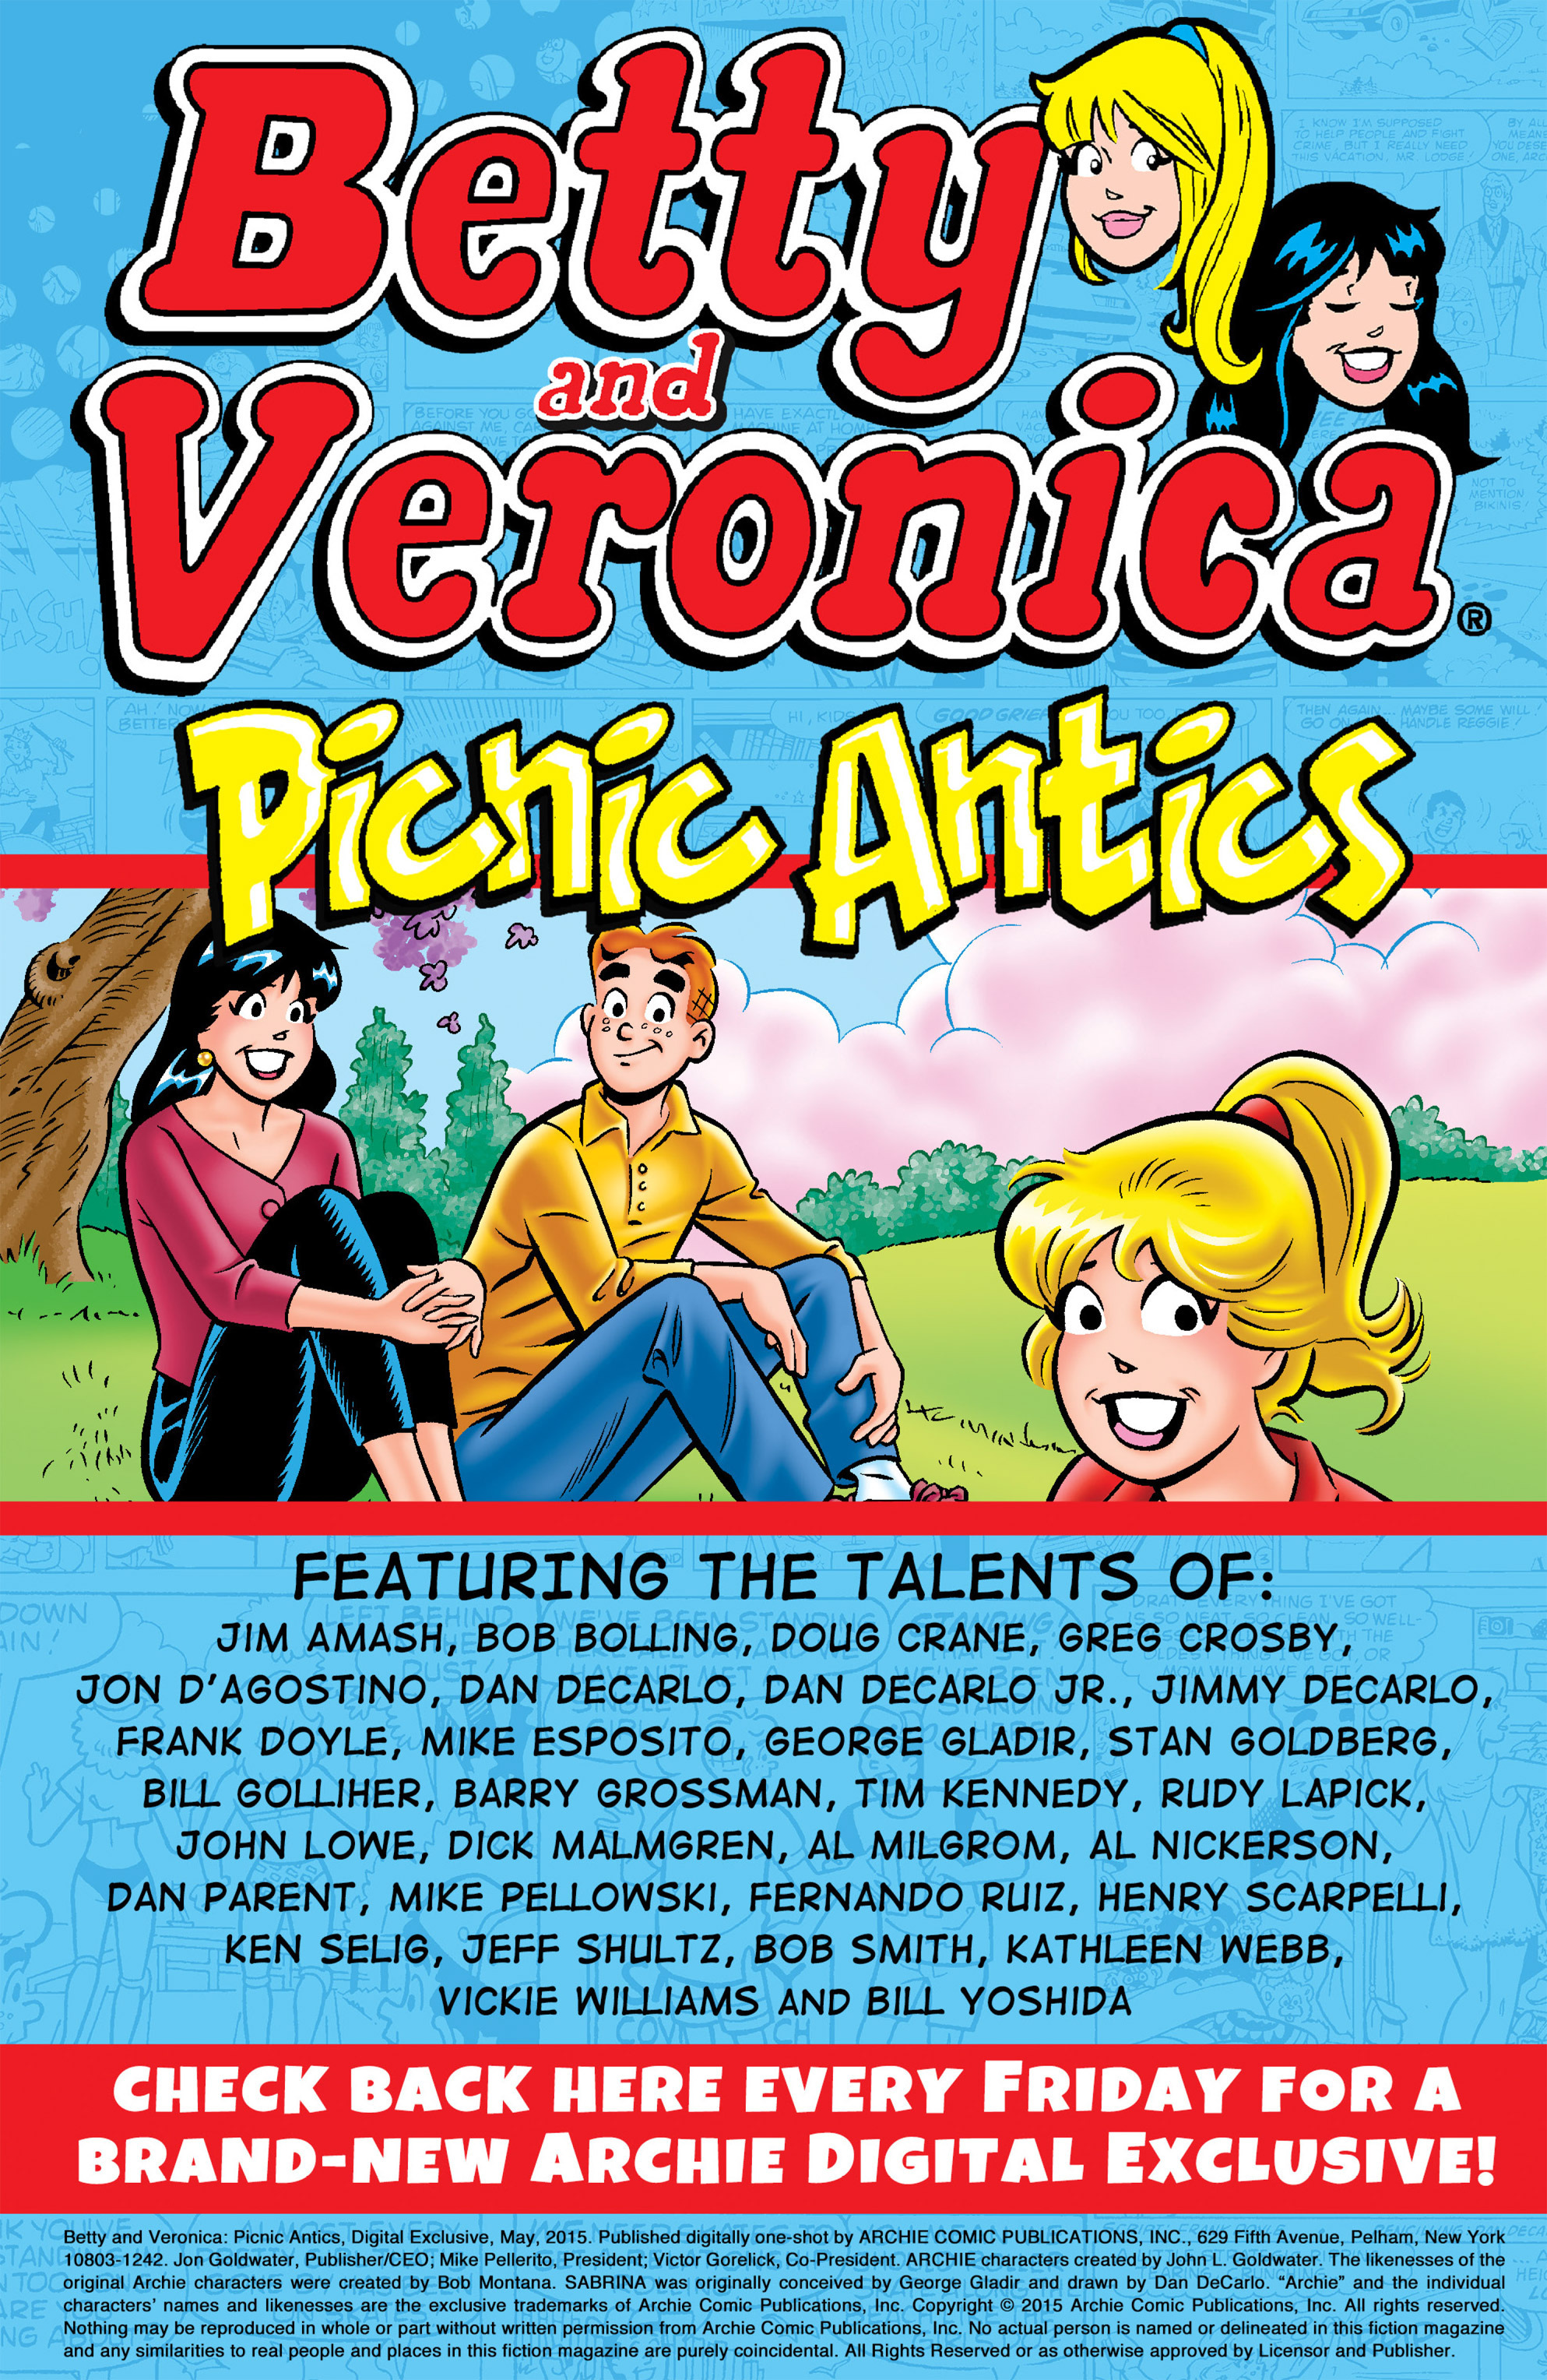 Read online Betty and Veronica: Picnic Antics comic -  Issue # TPB - 2